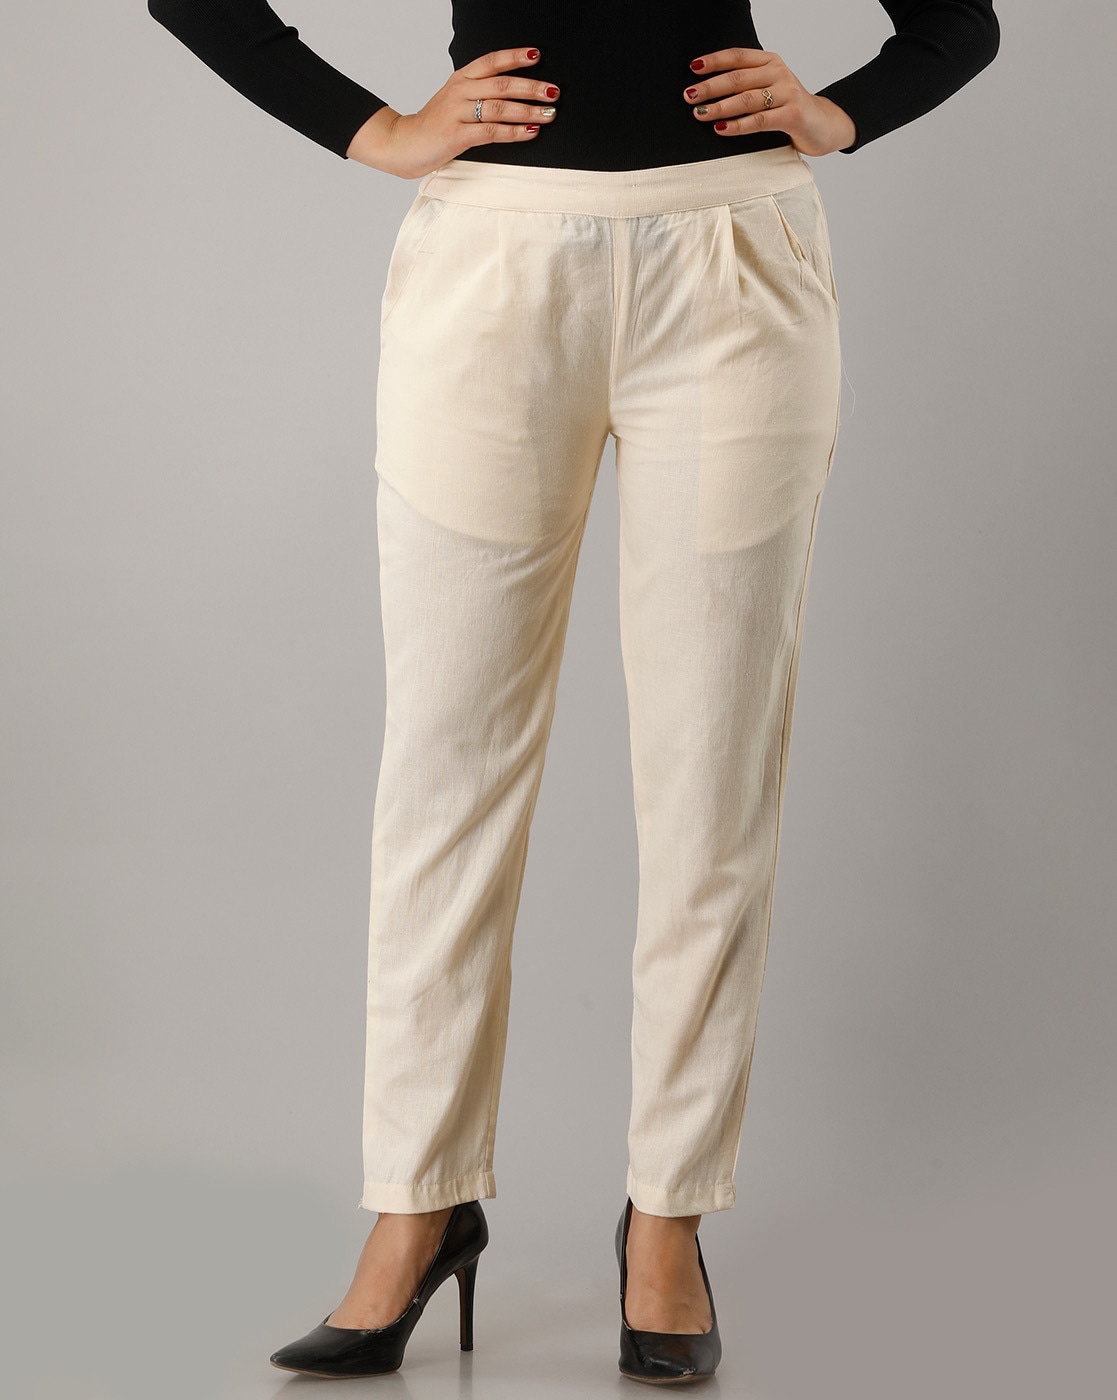 Buy Black Trousers & Pants for Women by SELVIA Online | Ajio.com